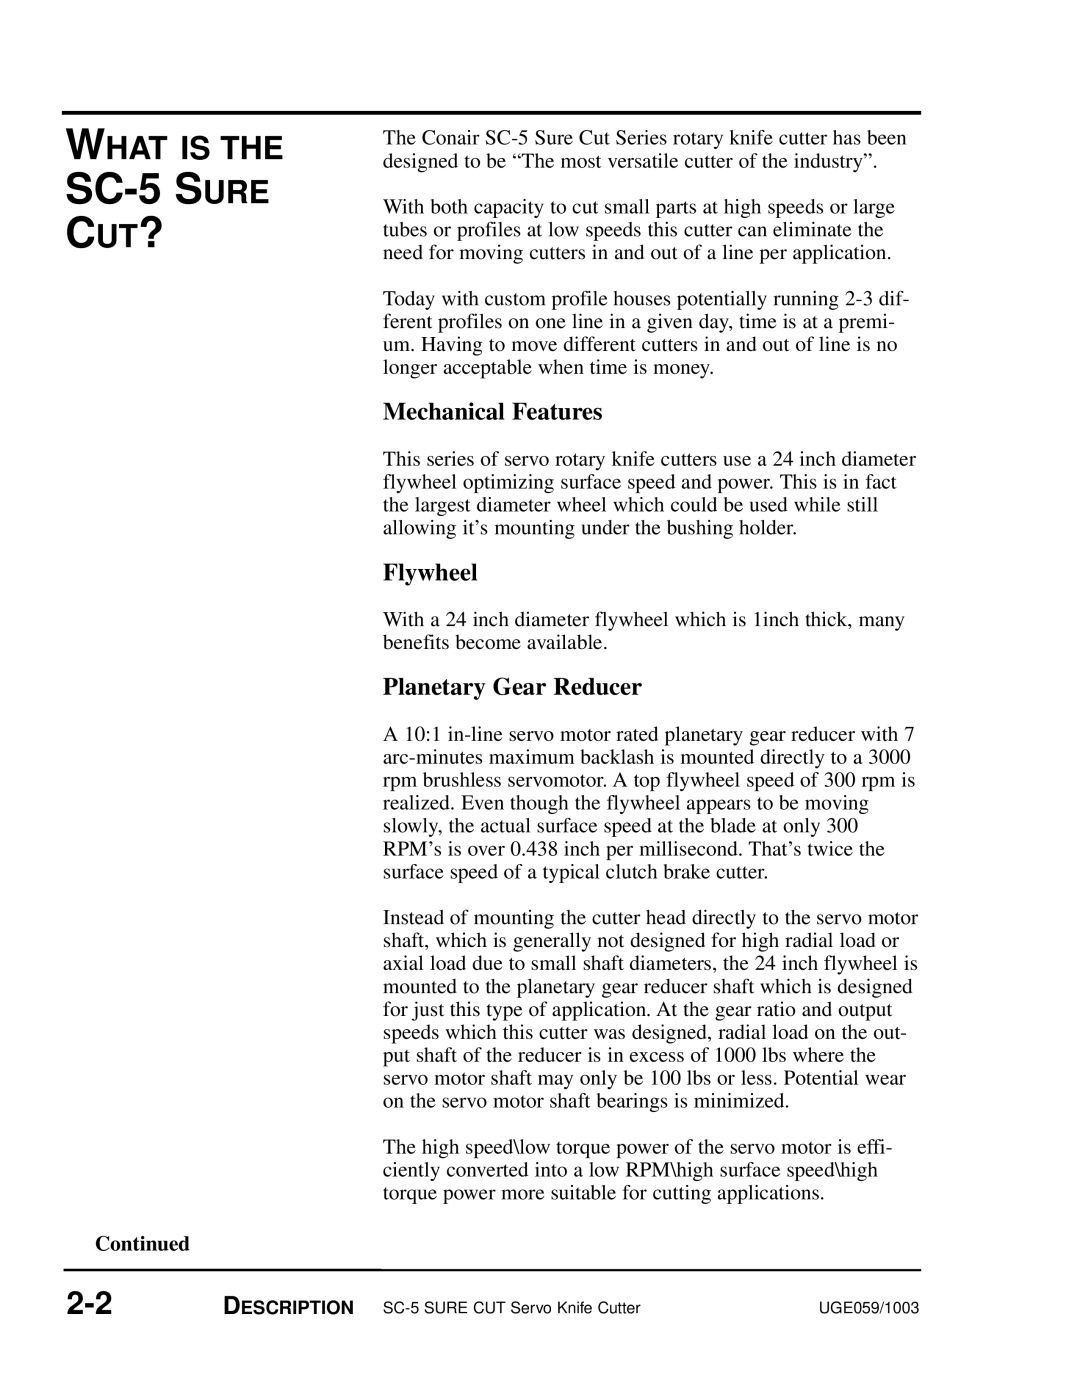 Conair manual SC-5 SURE CUT?, What Is The, Mechanical Features, Flywheel, Planetary Gear Reducer, Continued 